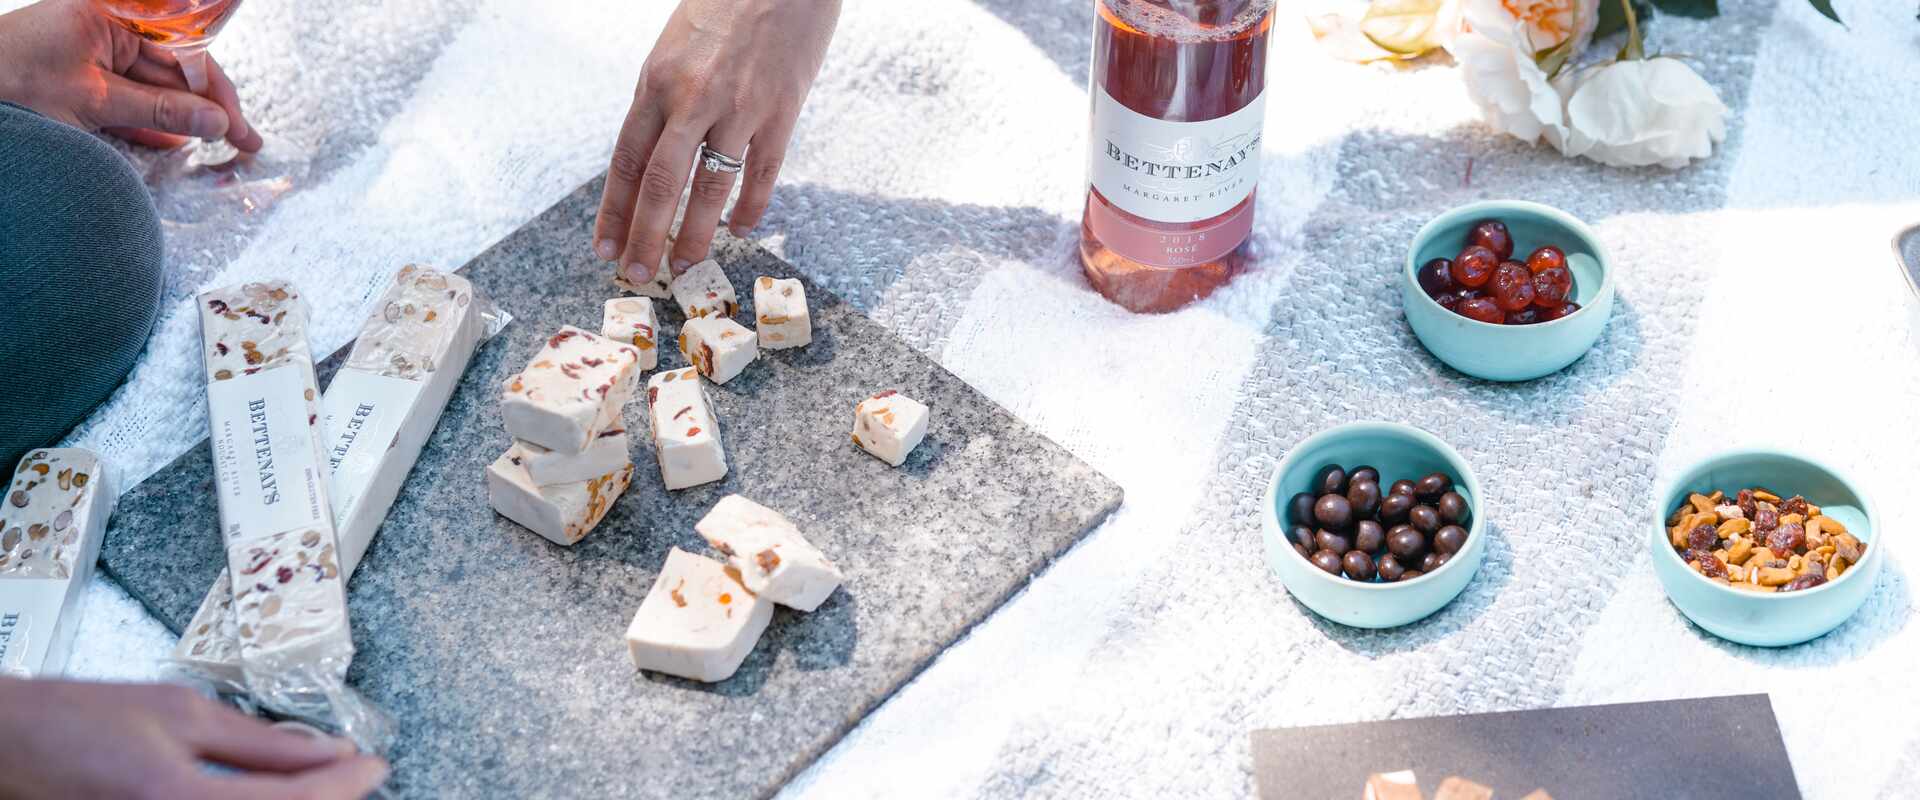 margaret river nougat company outdoor setting with bettenay nougat and wine